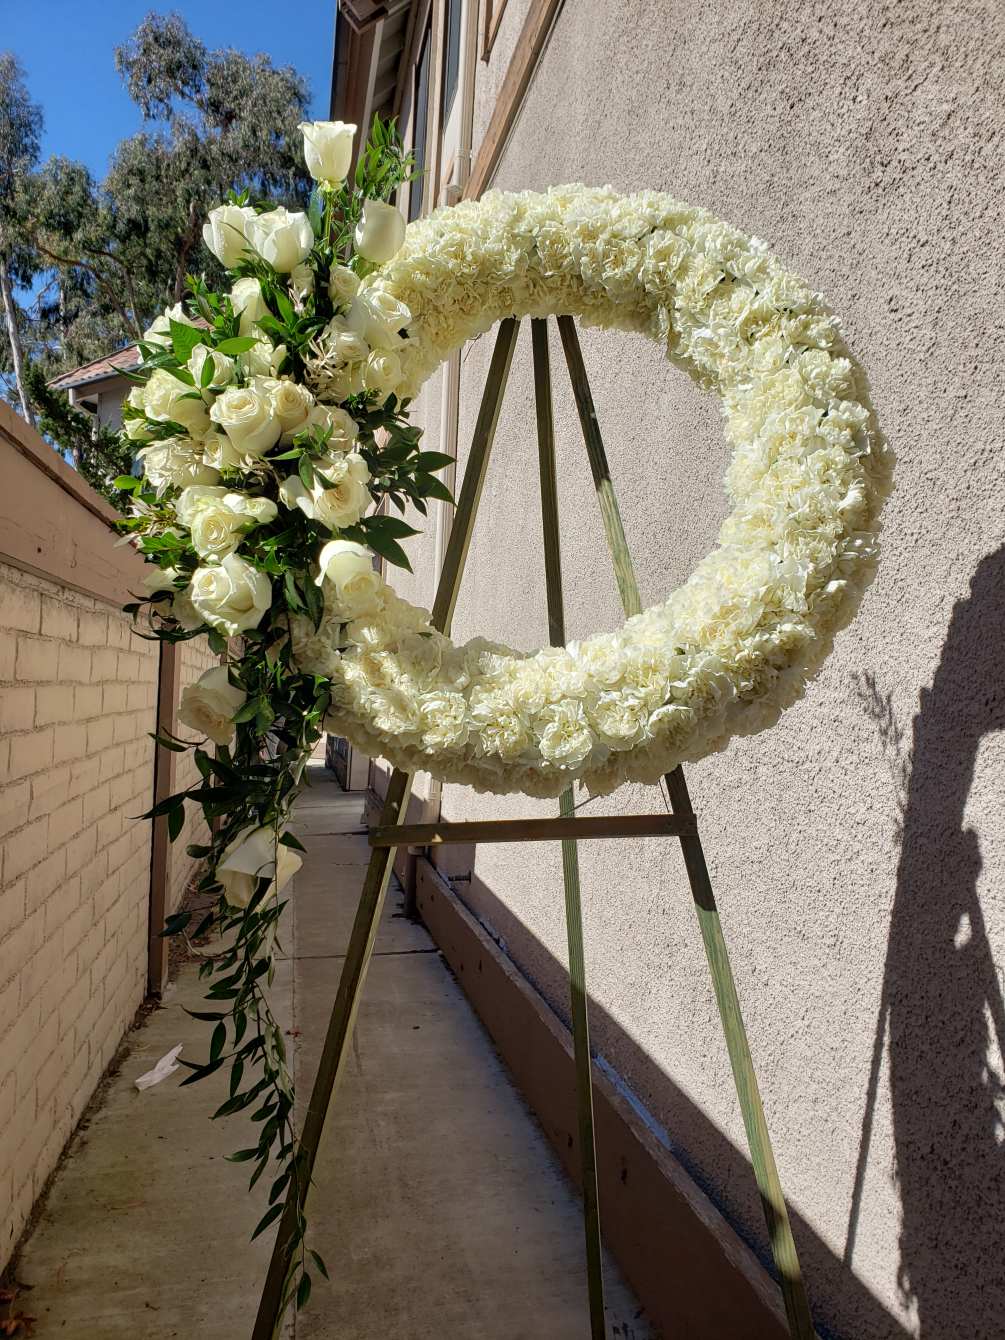 A wreath made with all white carnations. adorned with with white roses